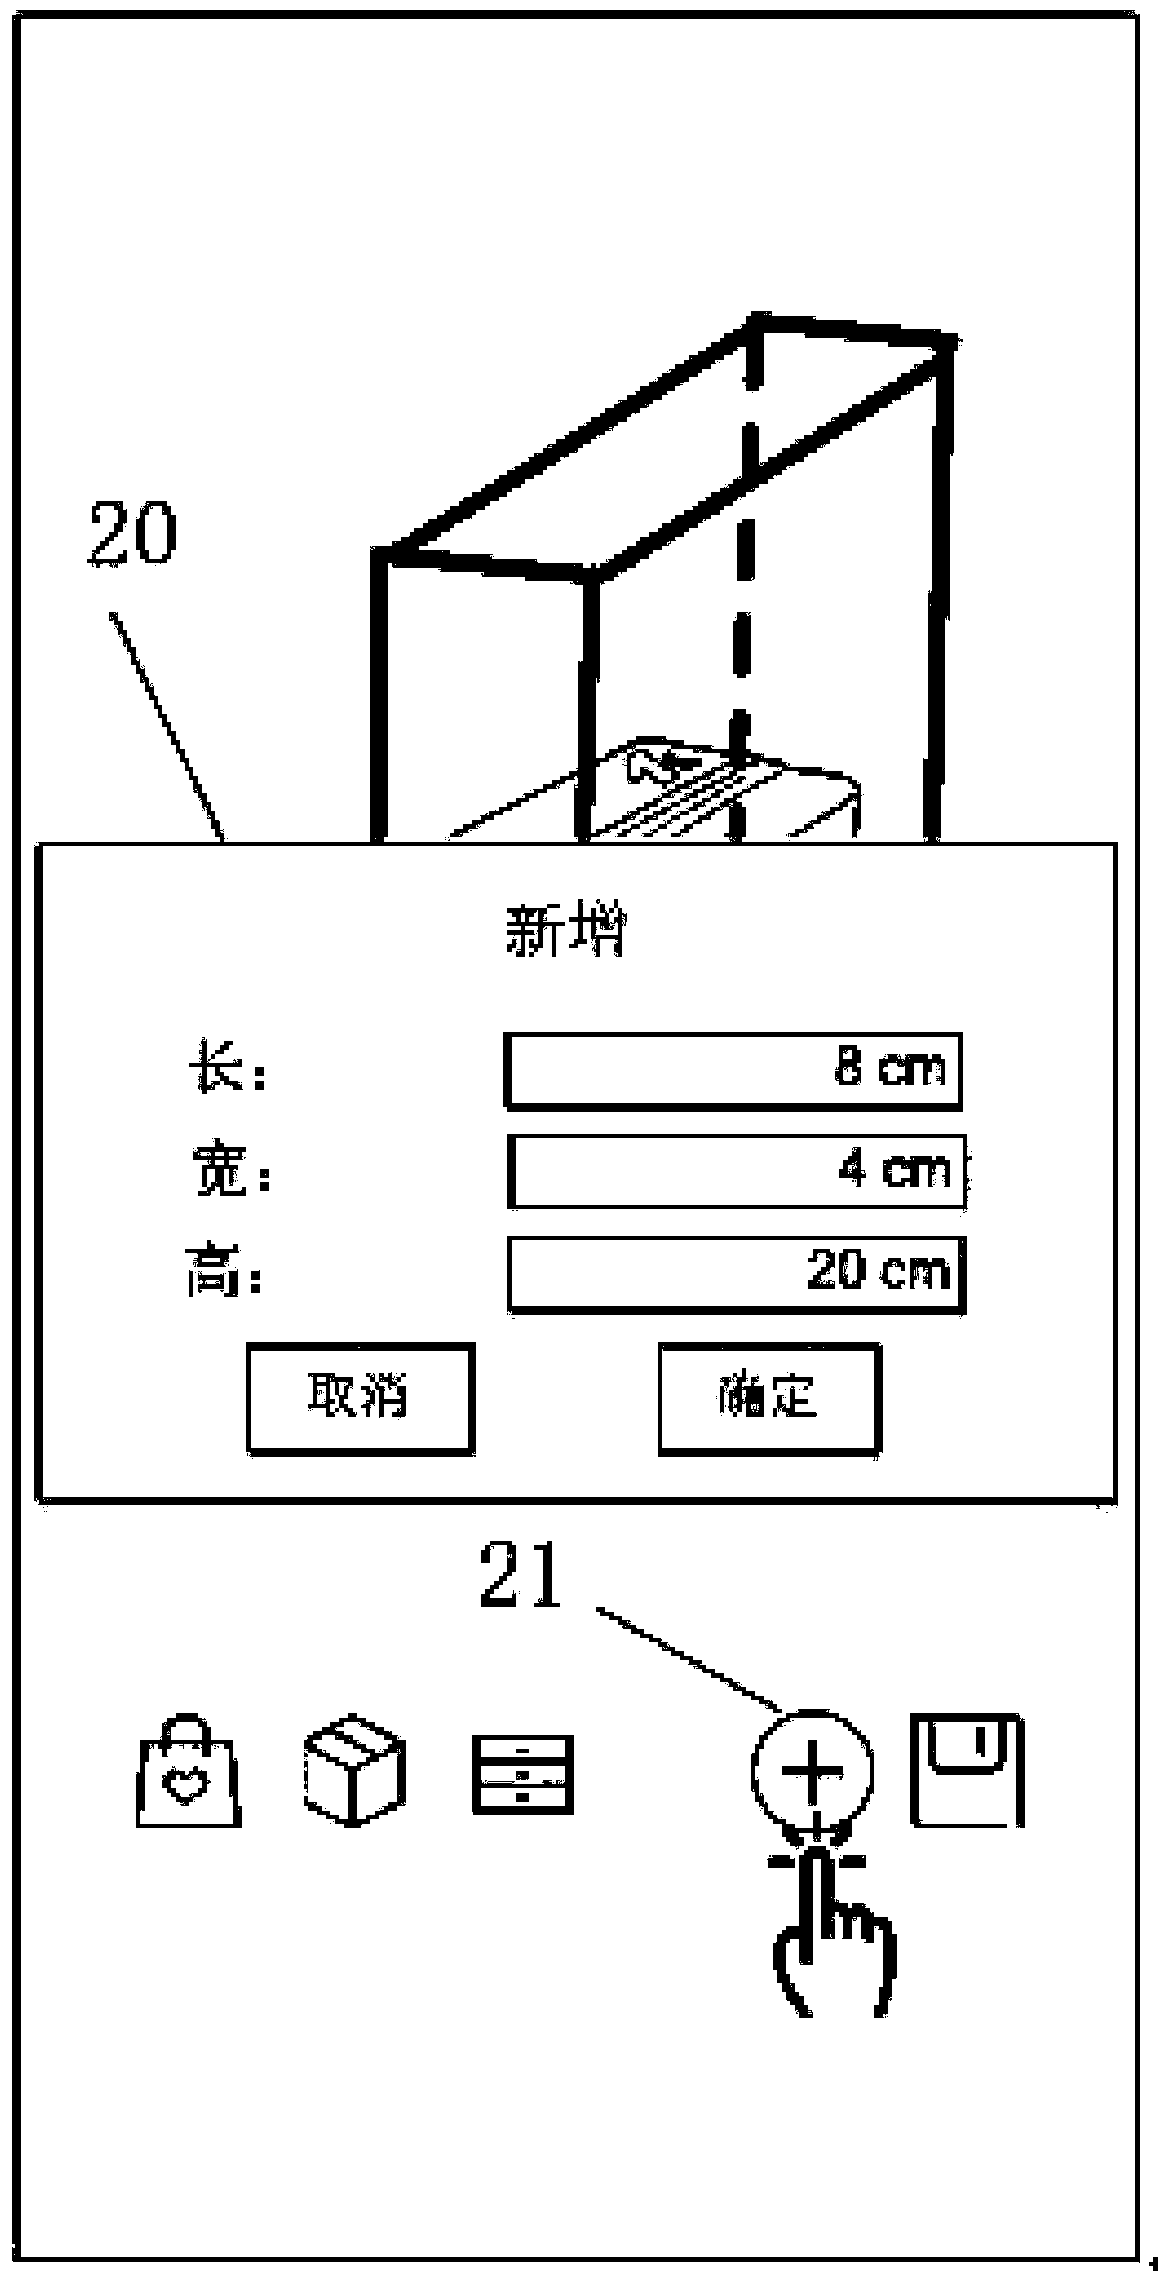 Object information display method and a mobile terminal